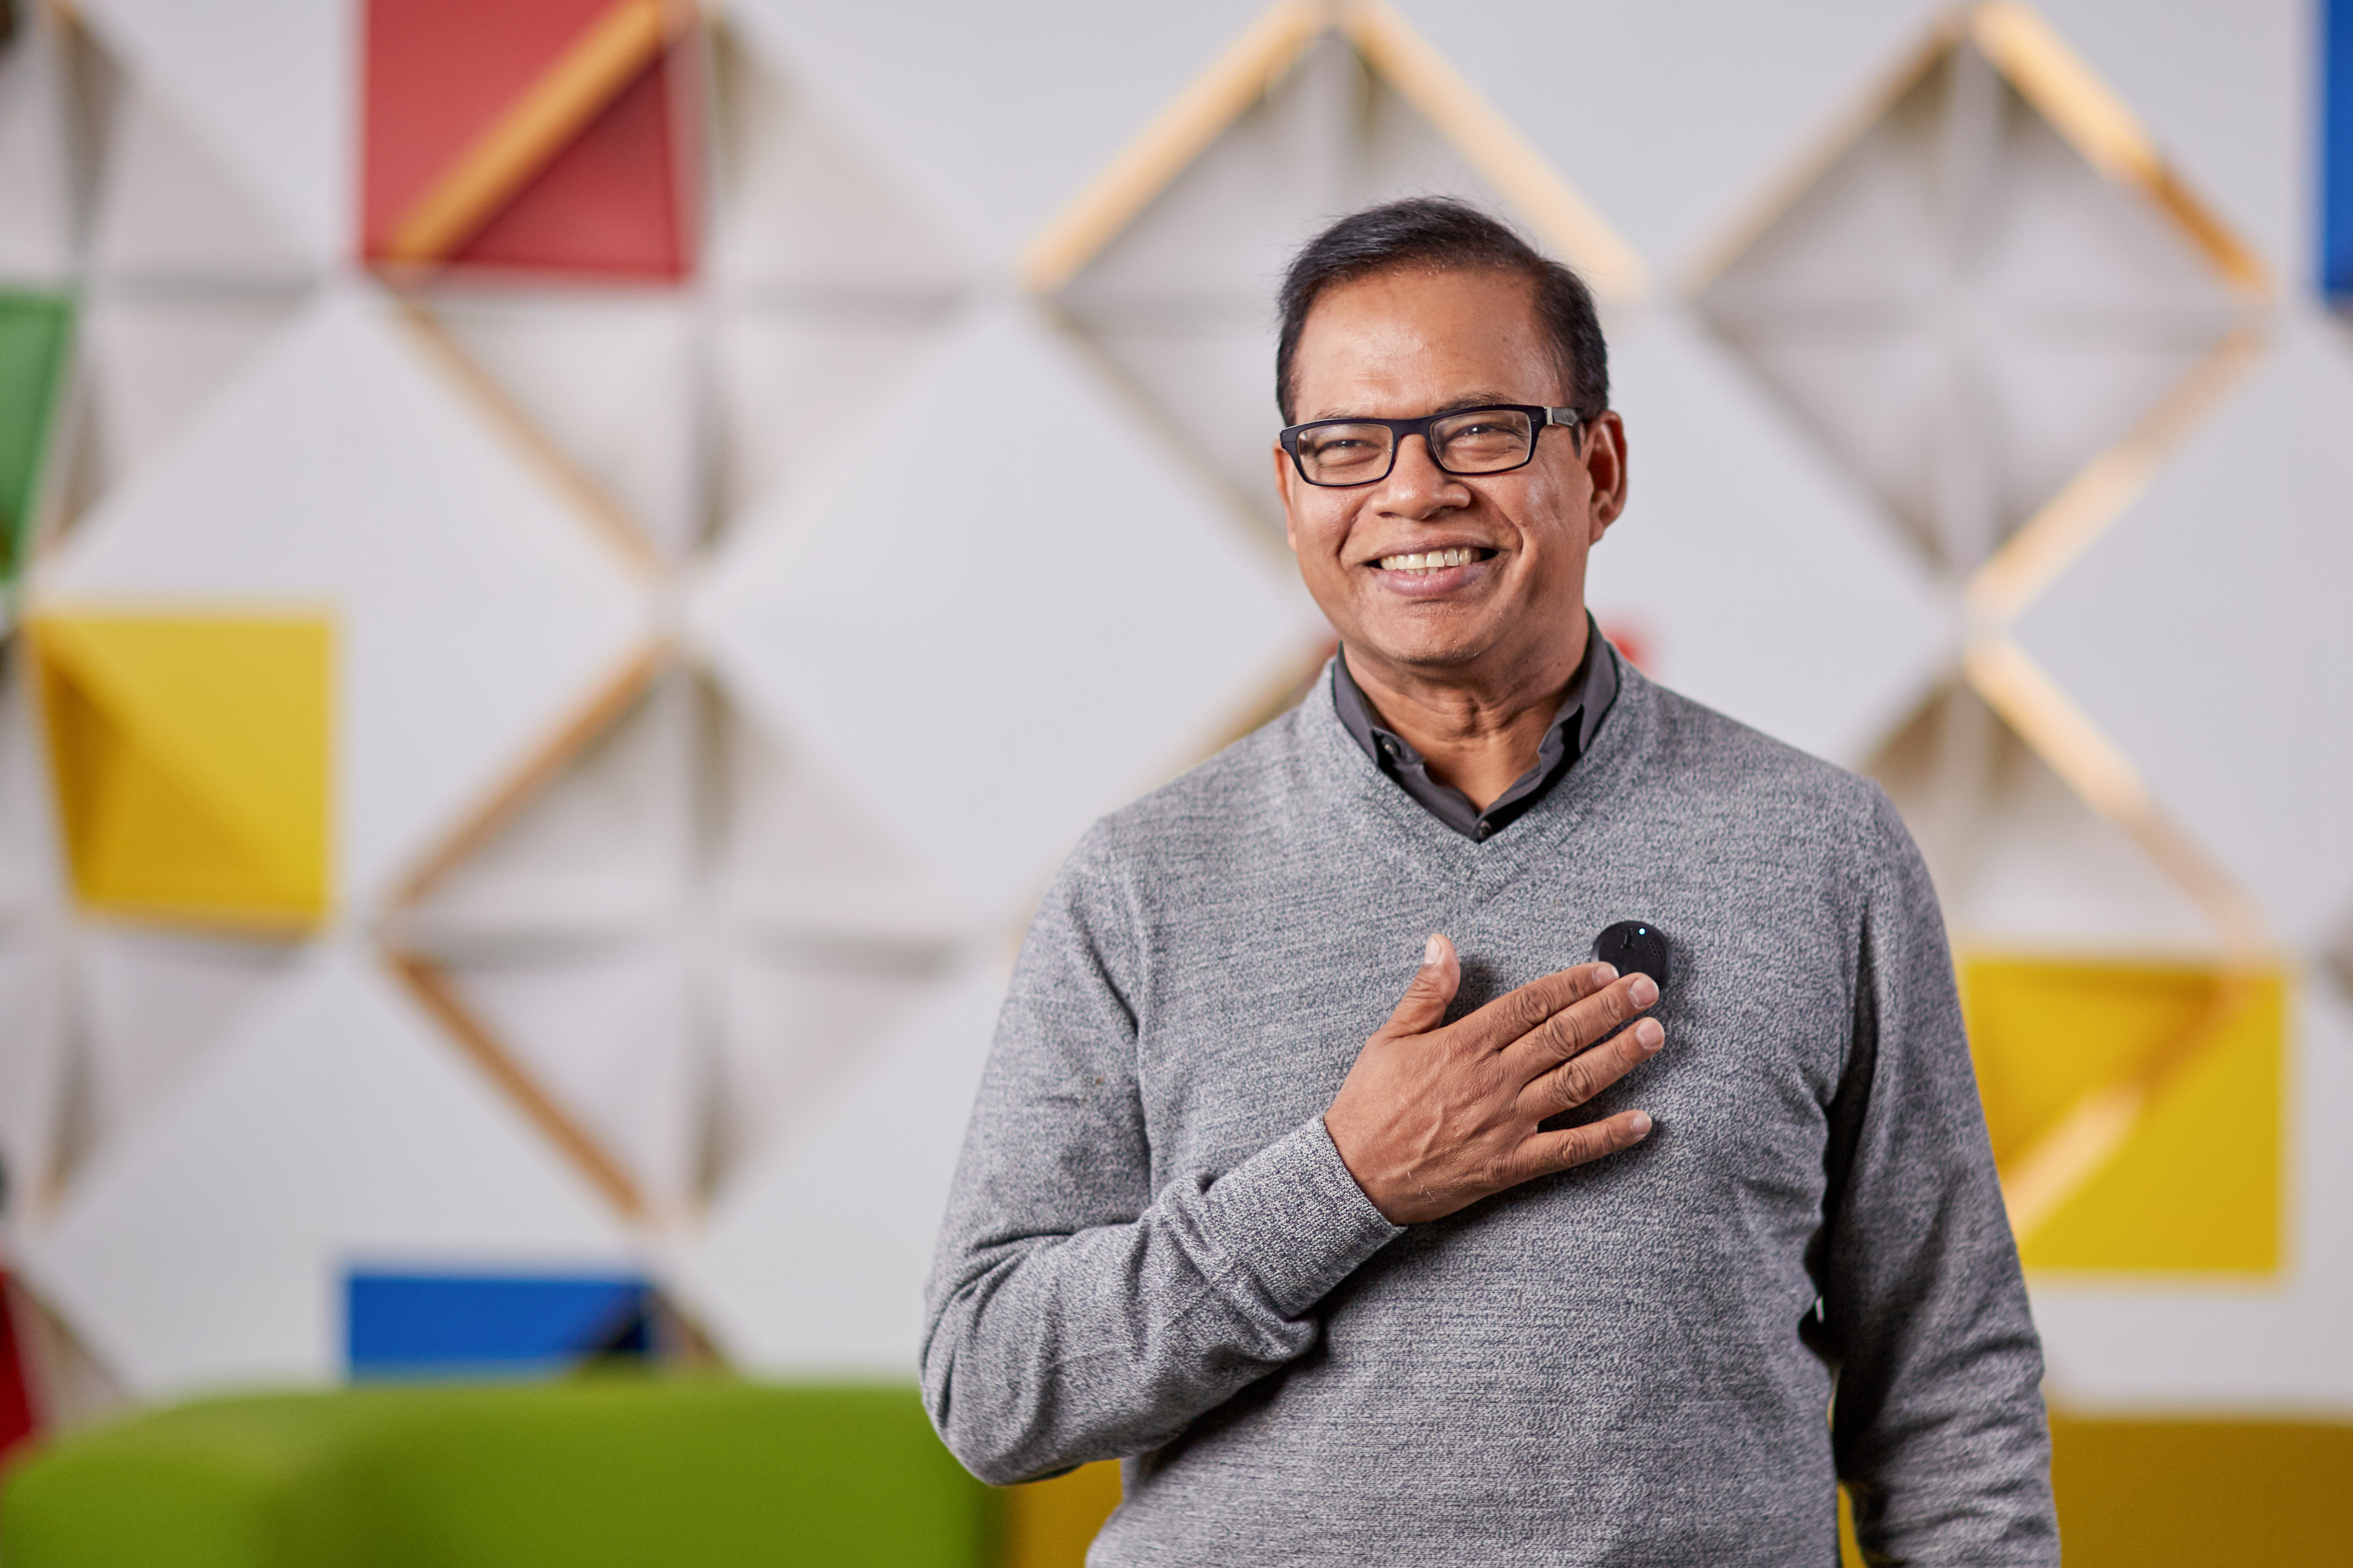 Amit Singhal, senior vice president and software engineer at Google, uses a prototype lapel pin modeled after the communicator badge from Star Trek. The device, which never left the testing phase, uses a microphone to listen to a user's voice and can use Bluetooth to send those commands to another device. (Google)